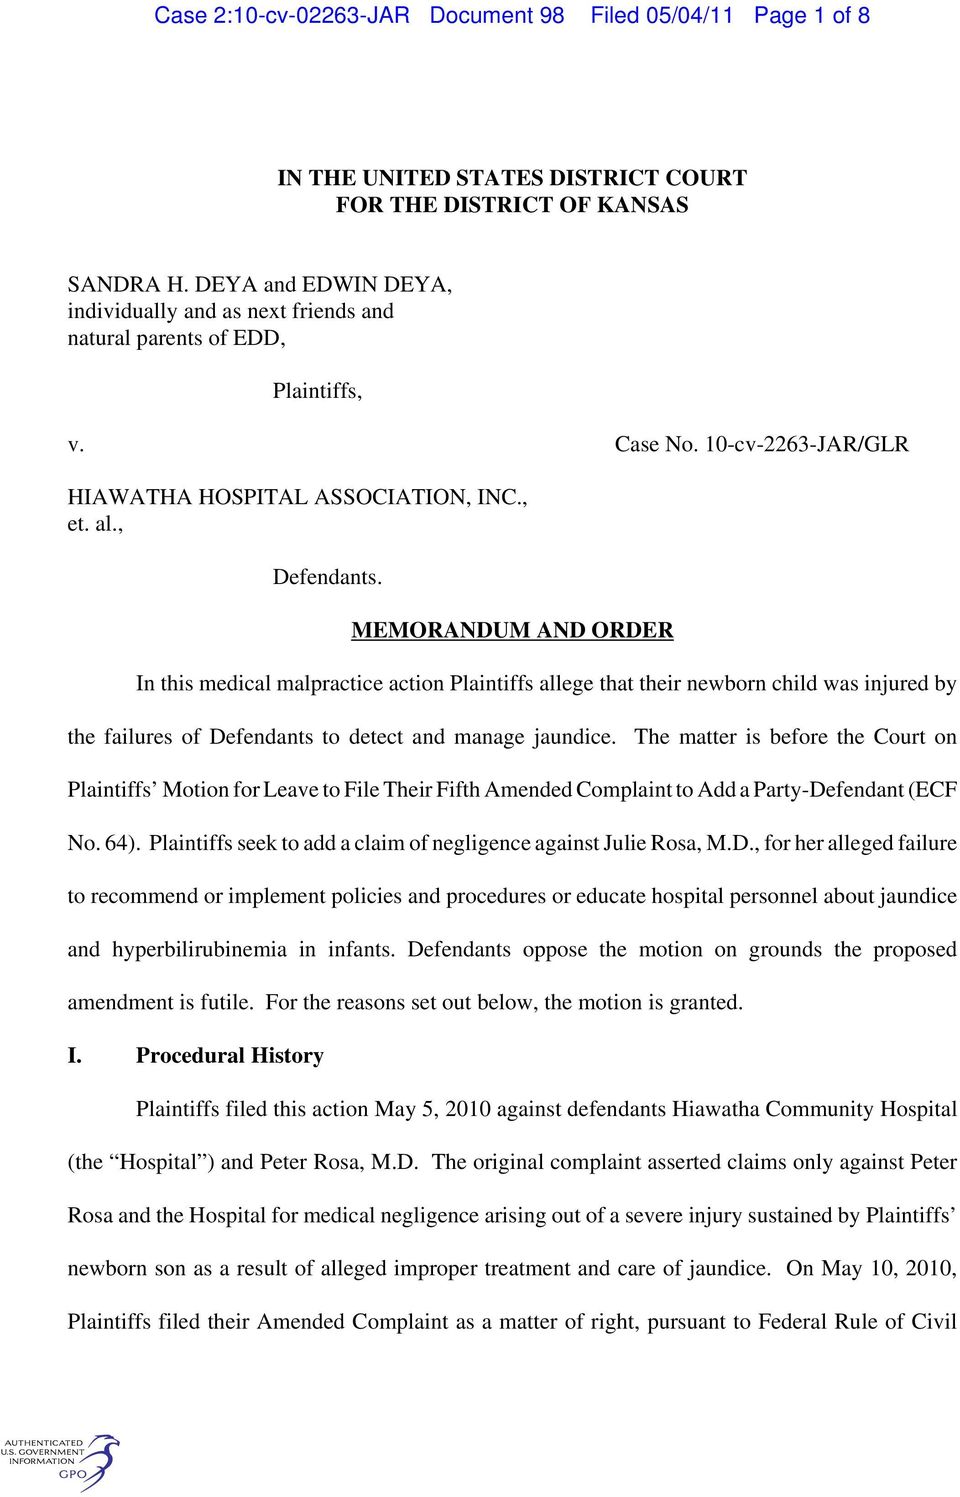 MEMORANDUM AND ORDER In this medical malpractice action Plaintiffs allege that their newborn child was injured by the failures of Defendants to detect and manage jaundice.